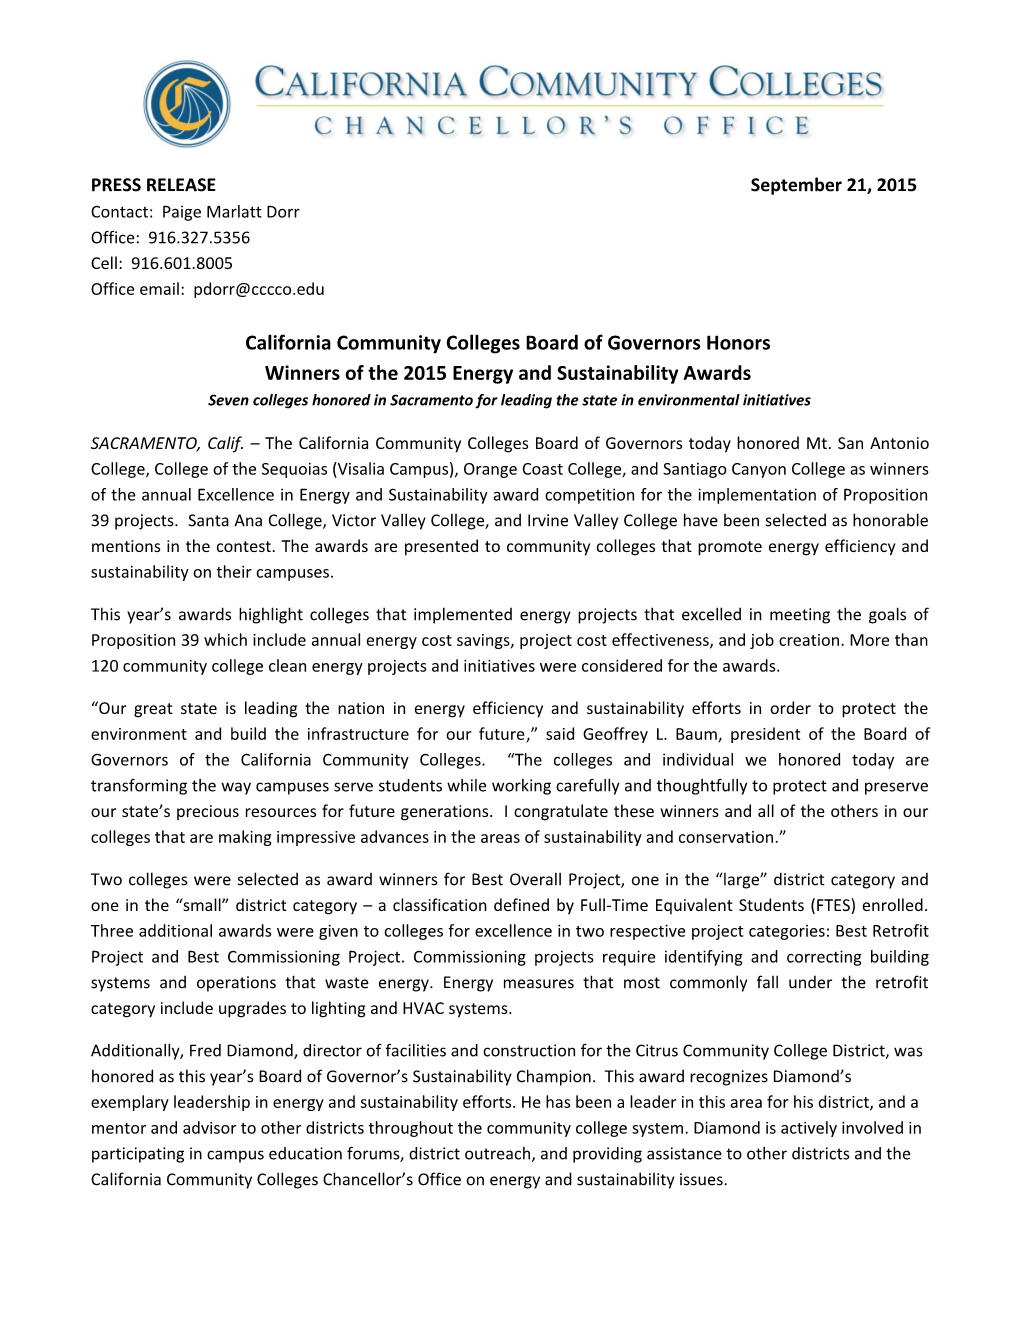 California Community Colleges Board of Governors Honors